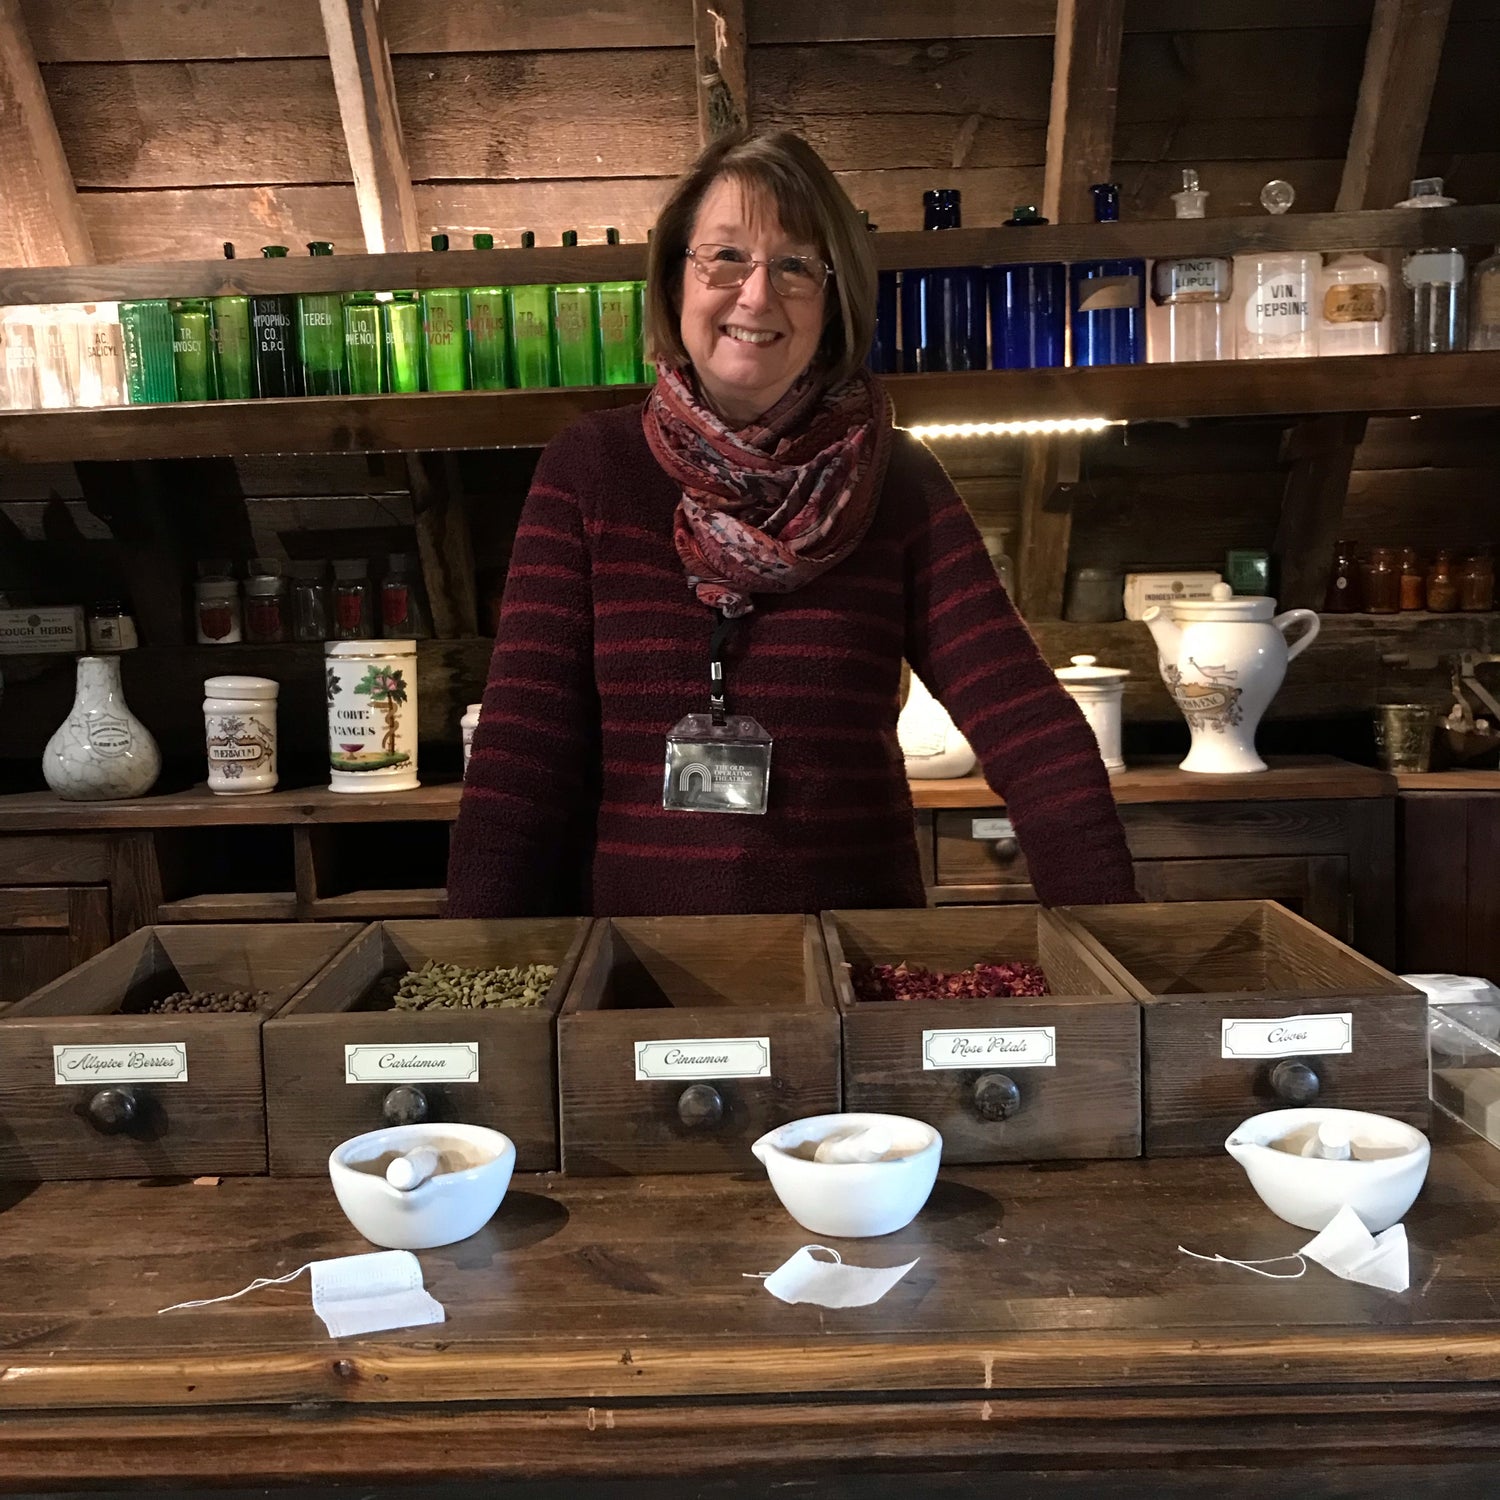 A smiling woman standing at the apothecary counter with drawers of dried herbs and small pestles and mortars in front of ehr